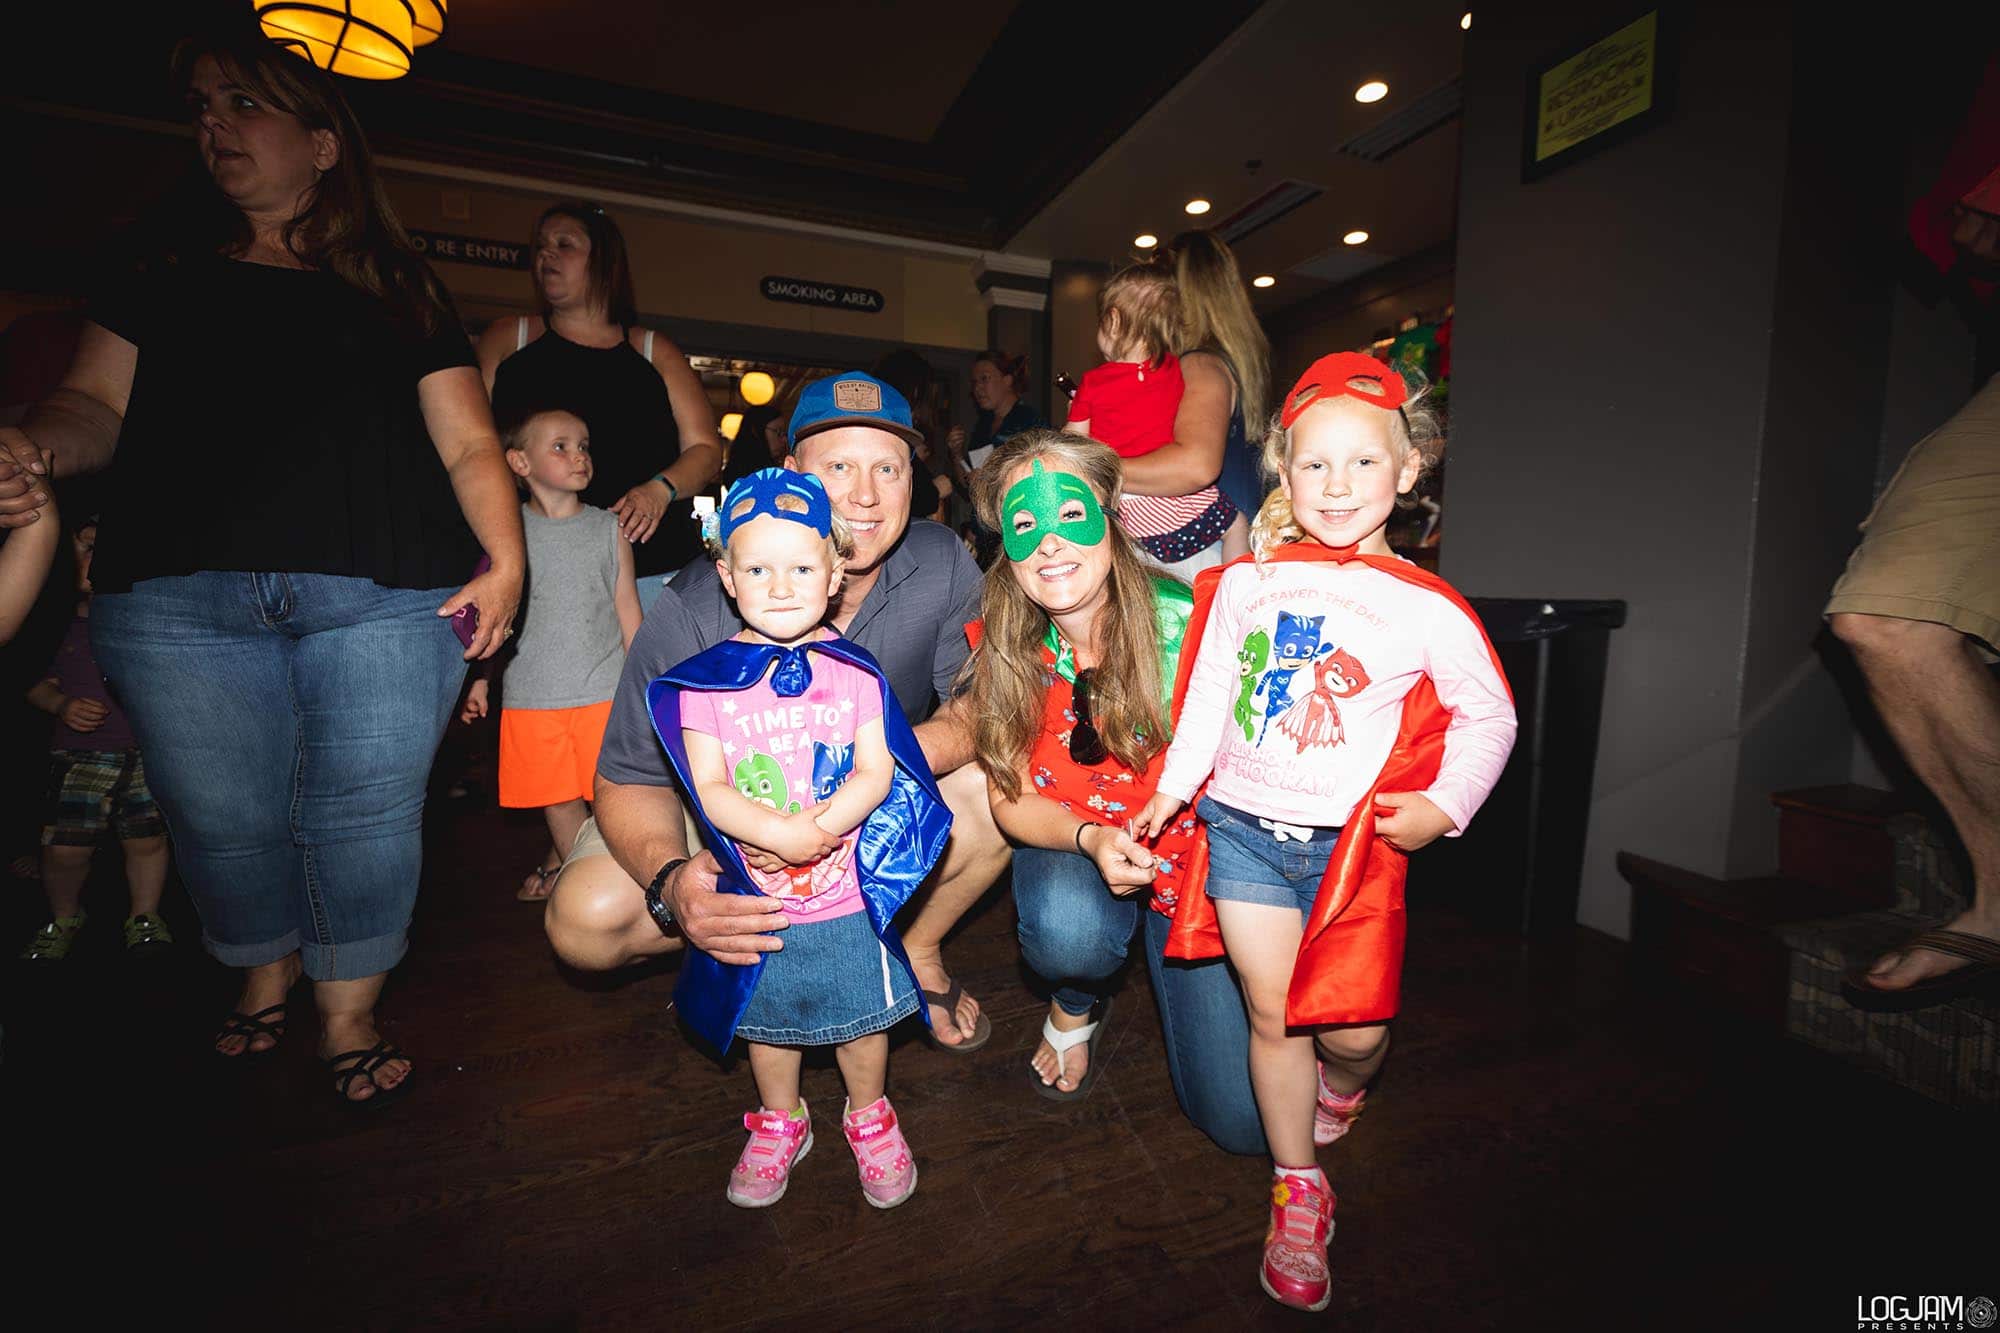 PJ Masks live at The Wilma on May 29, 2018